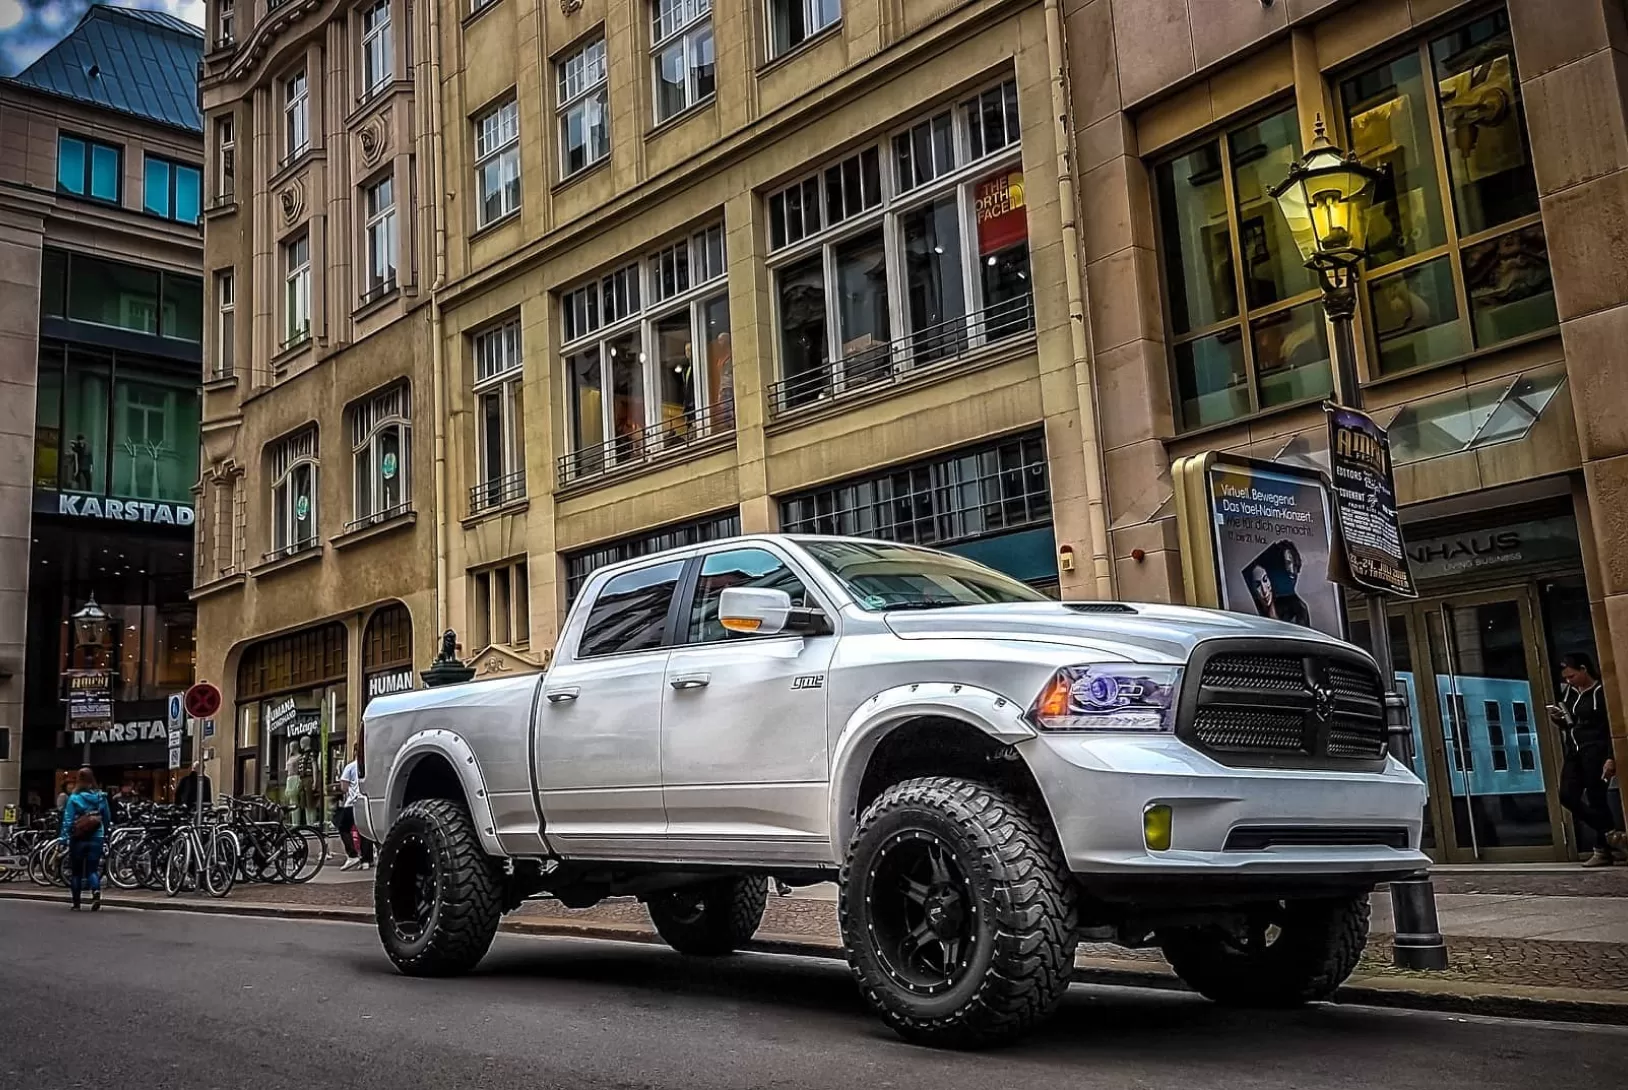 Dodge pickup in the city streets